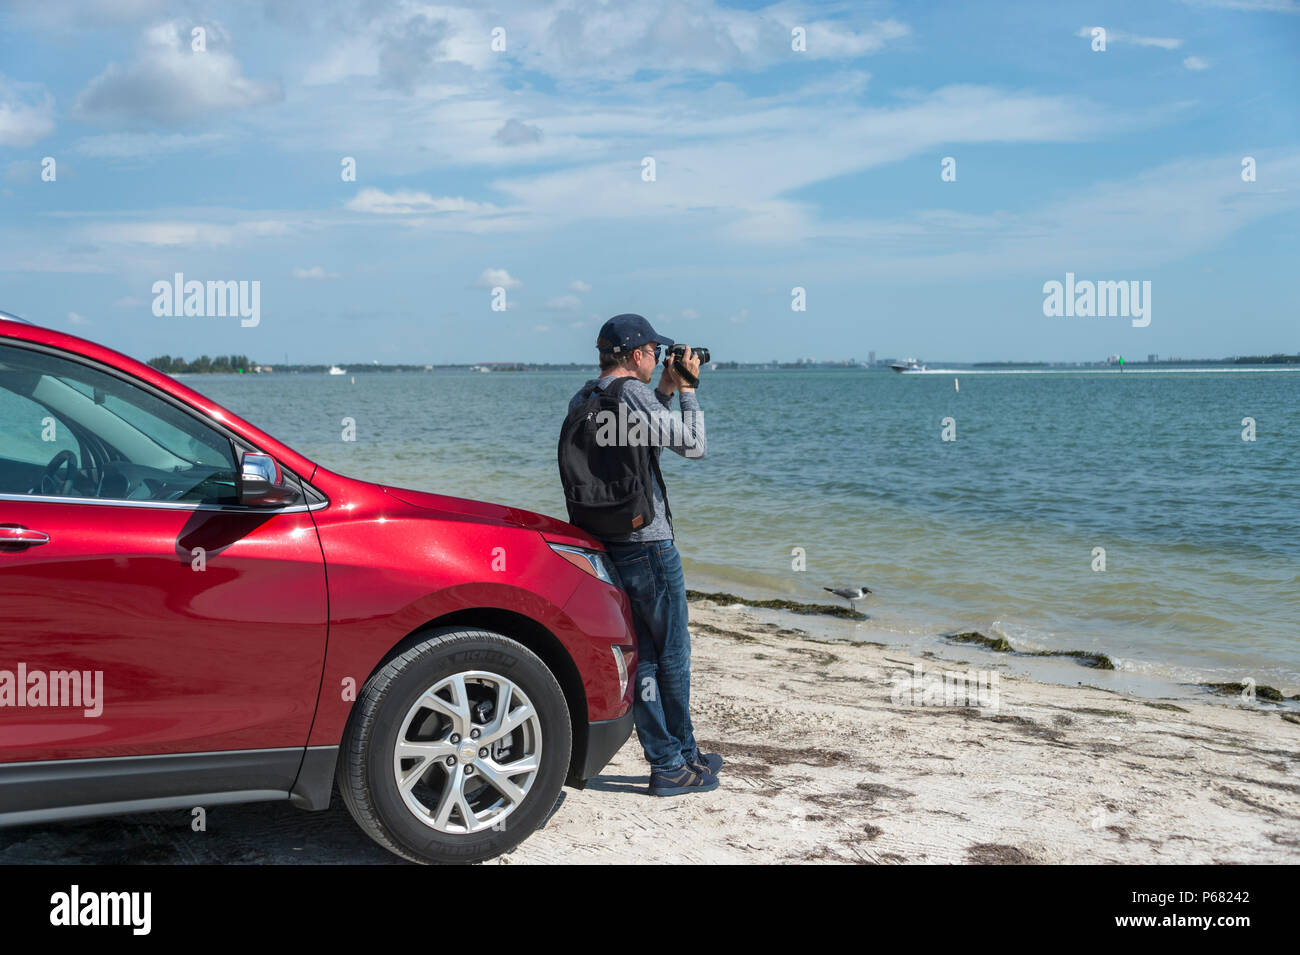 man leaning on a car taking photographs of the Gulf of Mexico with a DSLR camera Stock Photo